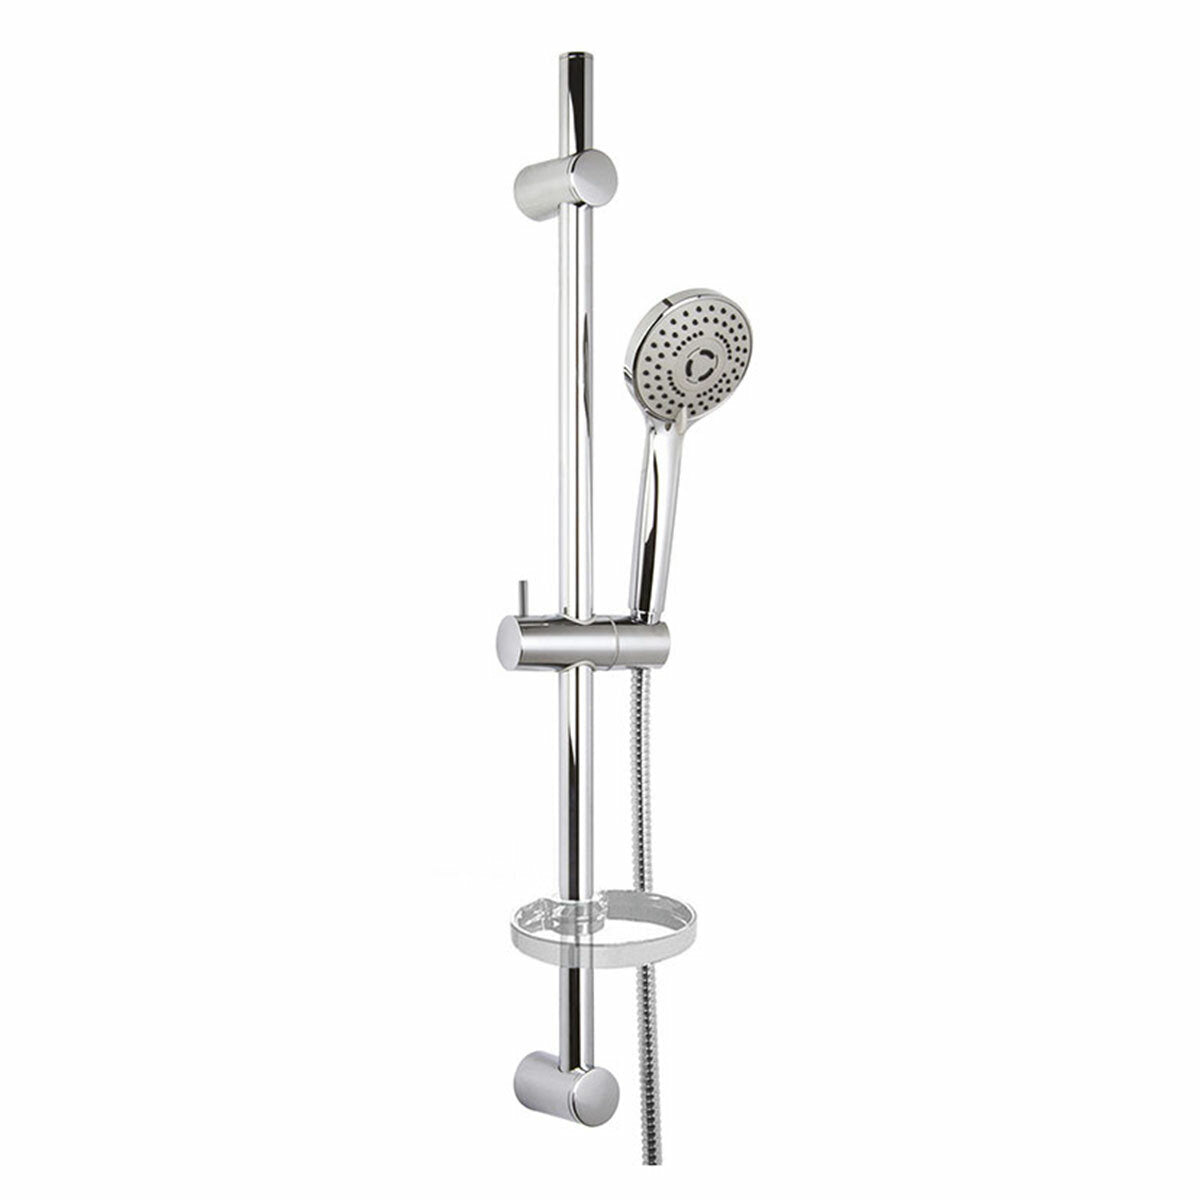 Fima Carlo Frattini Wellness Series sliding rail with ABS shower and soap dish